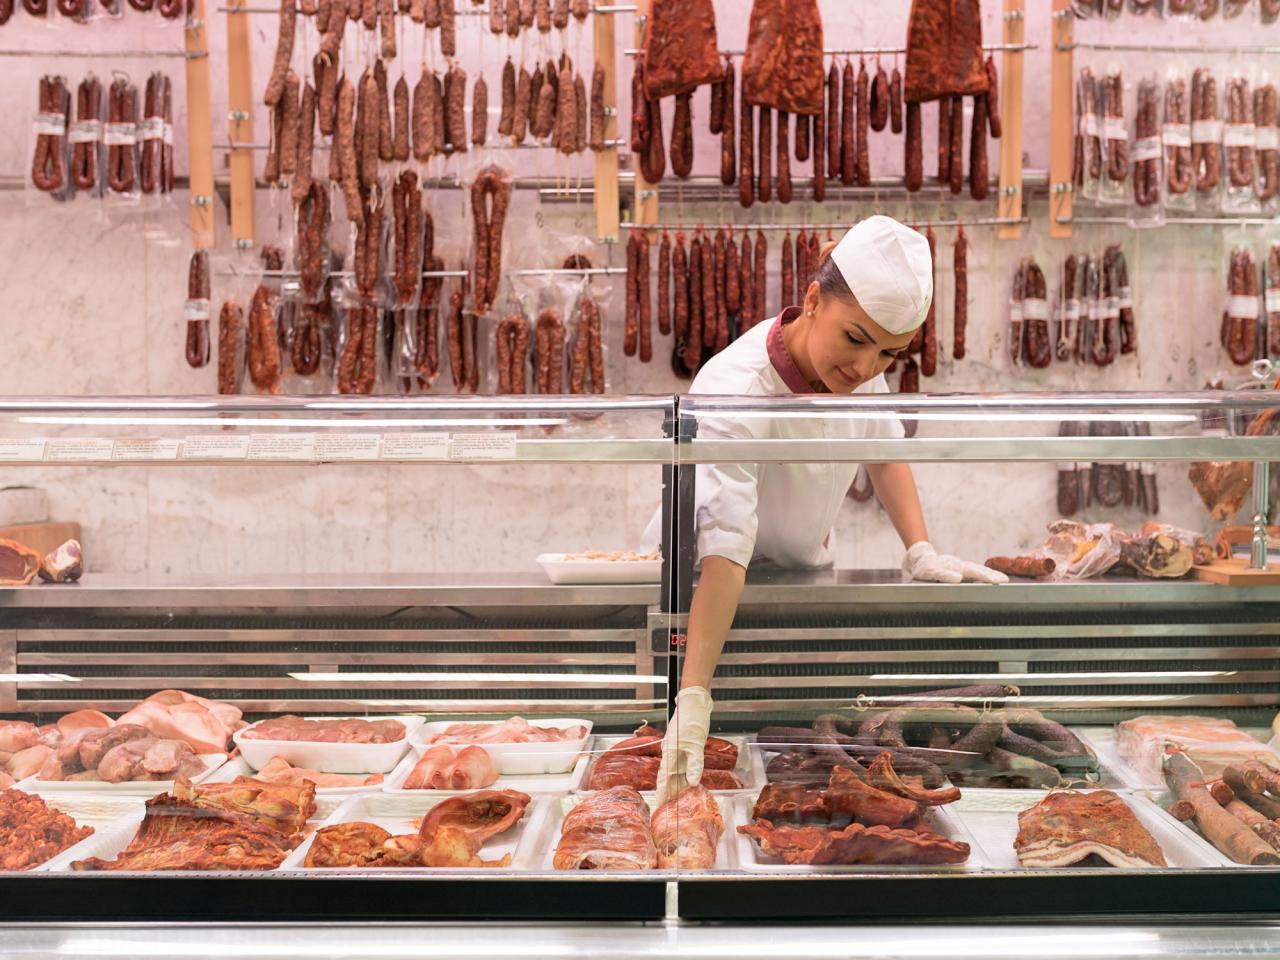 The 15 Best Butcher Shops and Meat Markets in Seattle, Washington